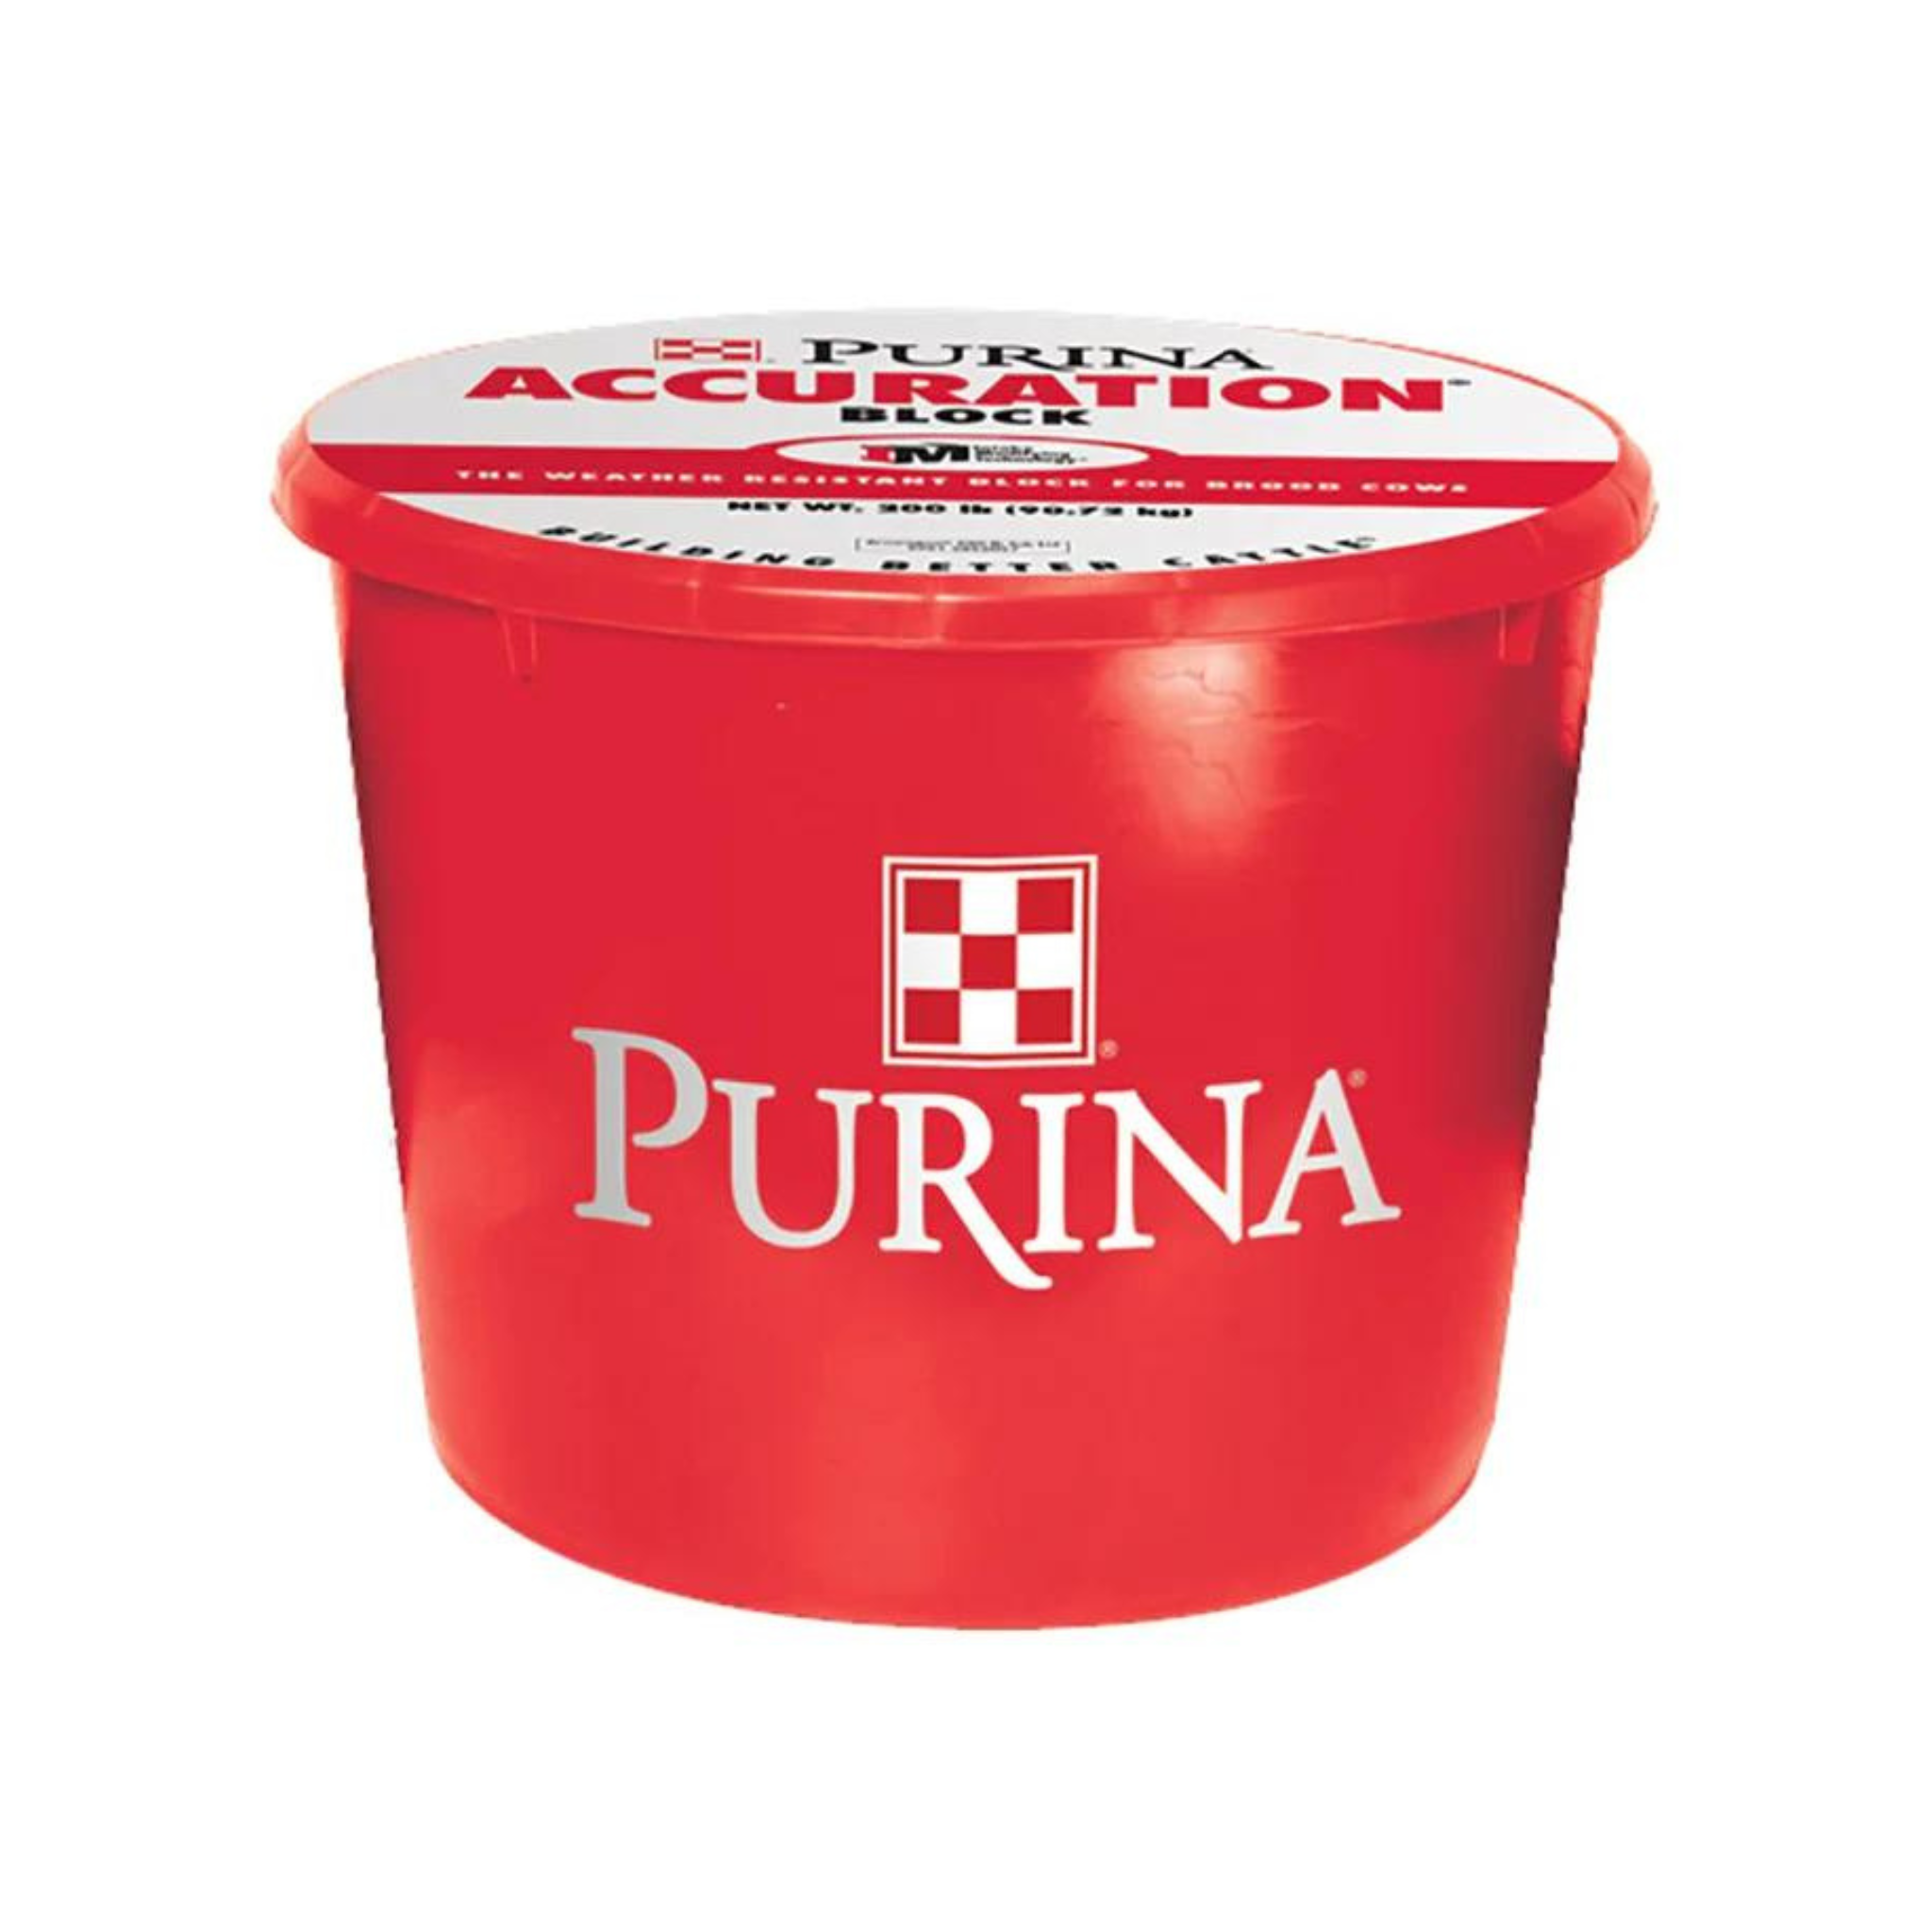 Purina Accuration Cattle Tub